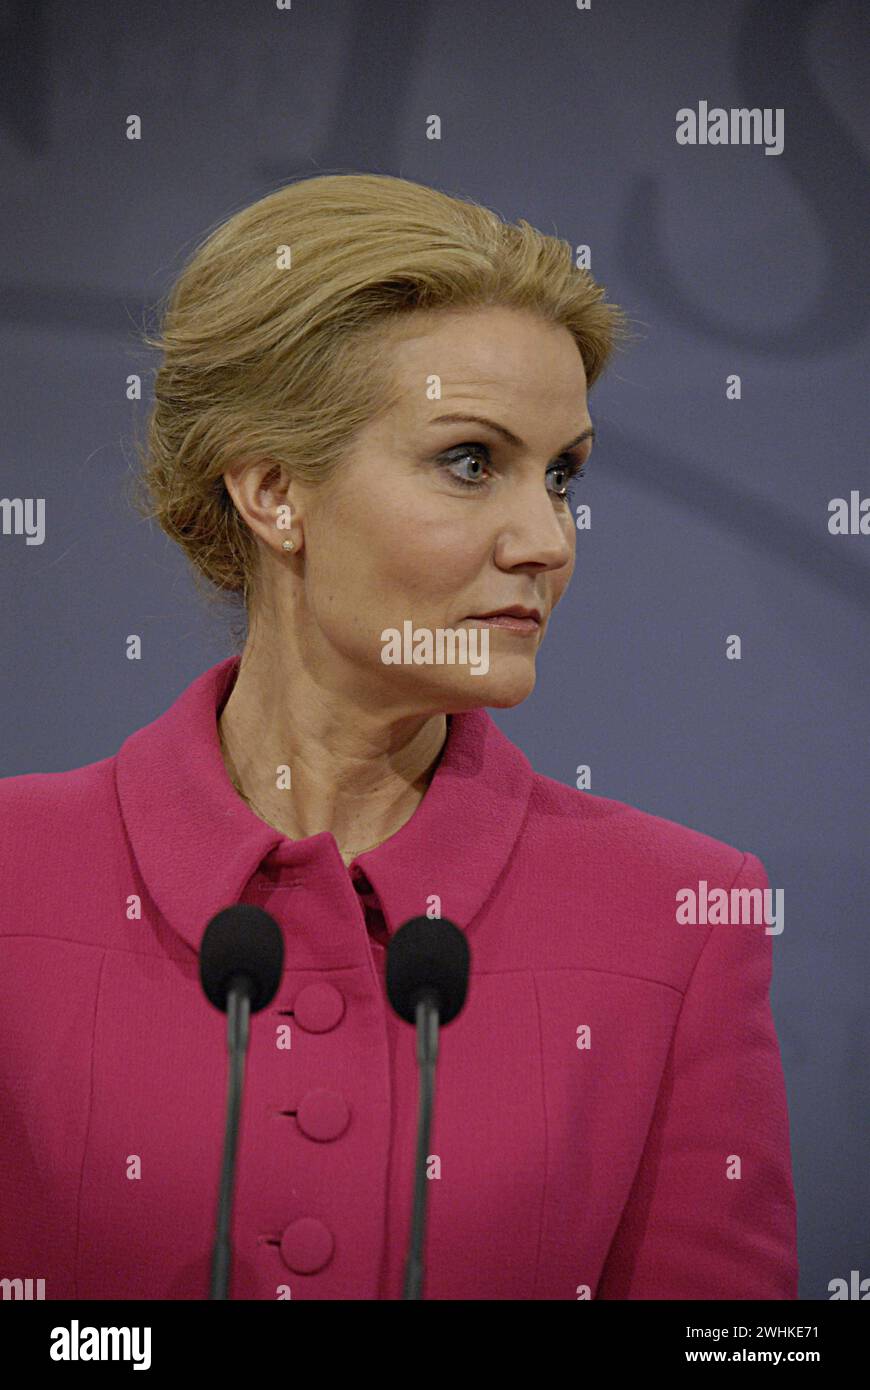 COPENHAGEN /DENMARK- 03 February 2014  Denmark s prime minister Ms. Helle Thorning-Schmidt in pink dress and leader of danish social democrat party and Ms.Margrethe Vestager vice prime minister and minister for economy and home minister right to prime minister in short hair dark dress and leader of danish radical political party hold joint press conference after reshaping cabint at Mirror hall at PM office at christionsborg today on monday Stock Photo